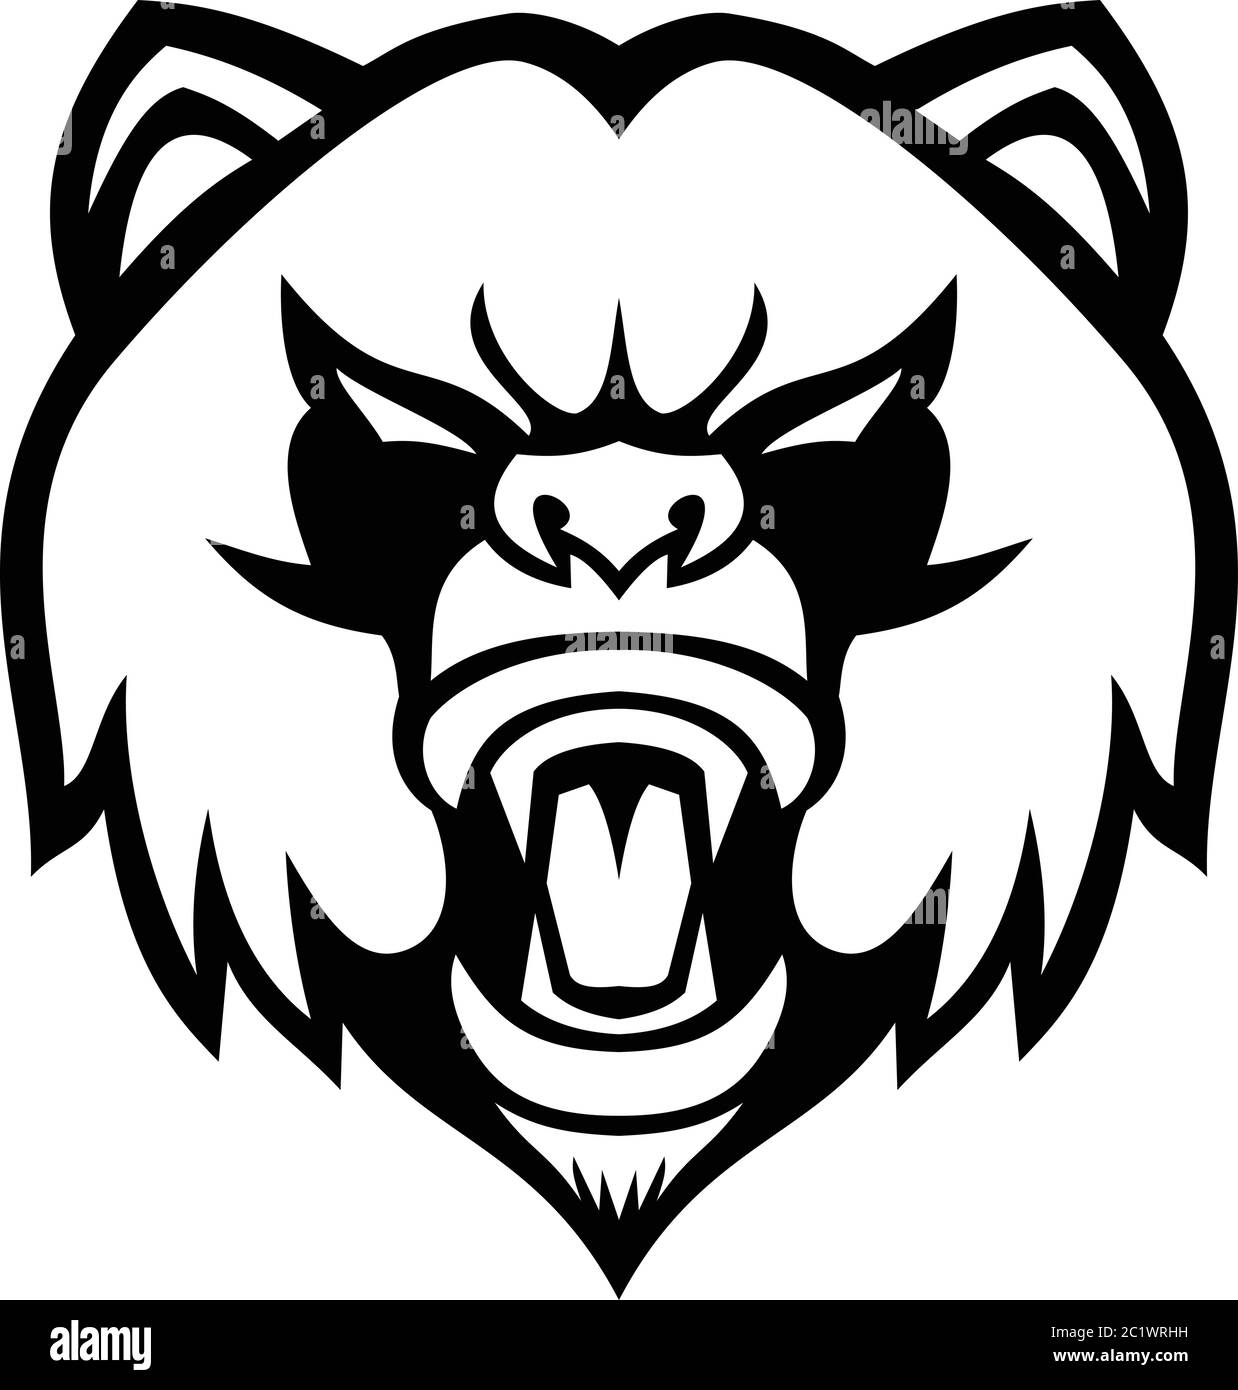 Black and white mascot illustration of head of an angry giant panda or panda bear, a bear native to south central China viewed from front on isolated Stock Vector